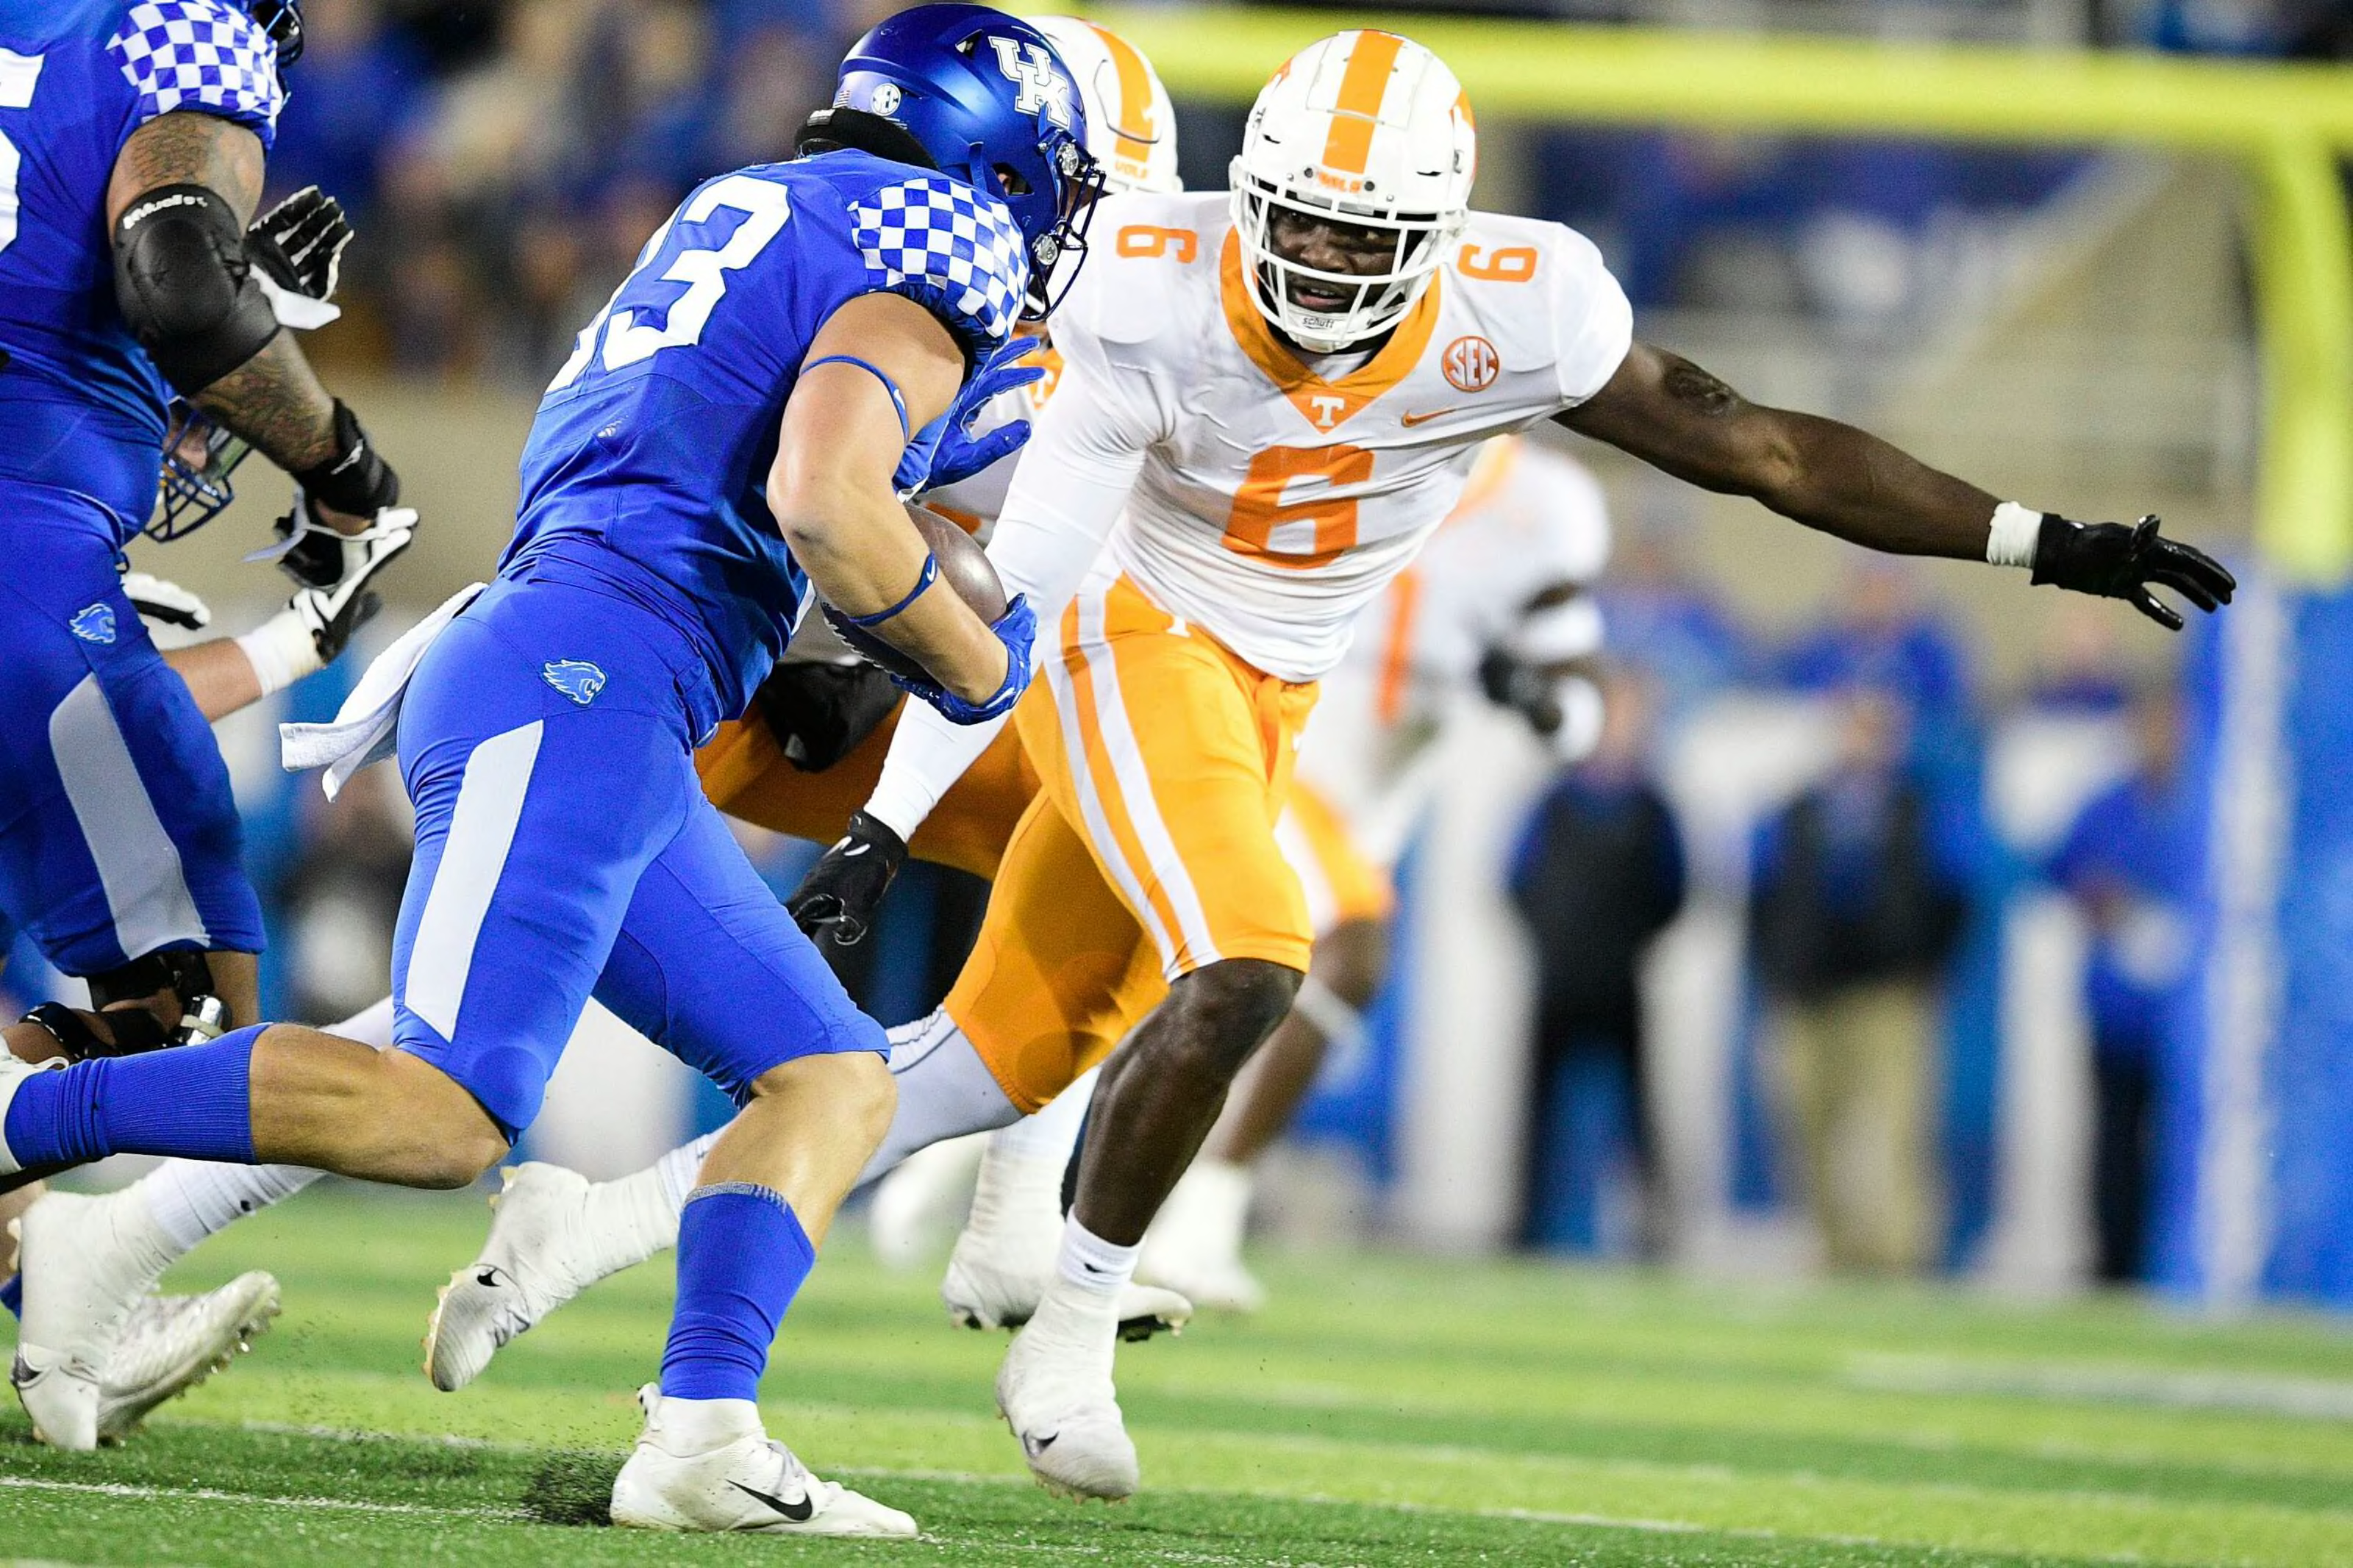 Tennessee football Top 10 games in 2021 by Vols returning for 2022